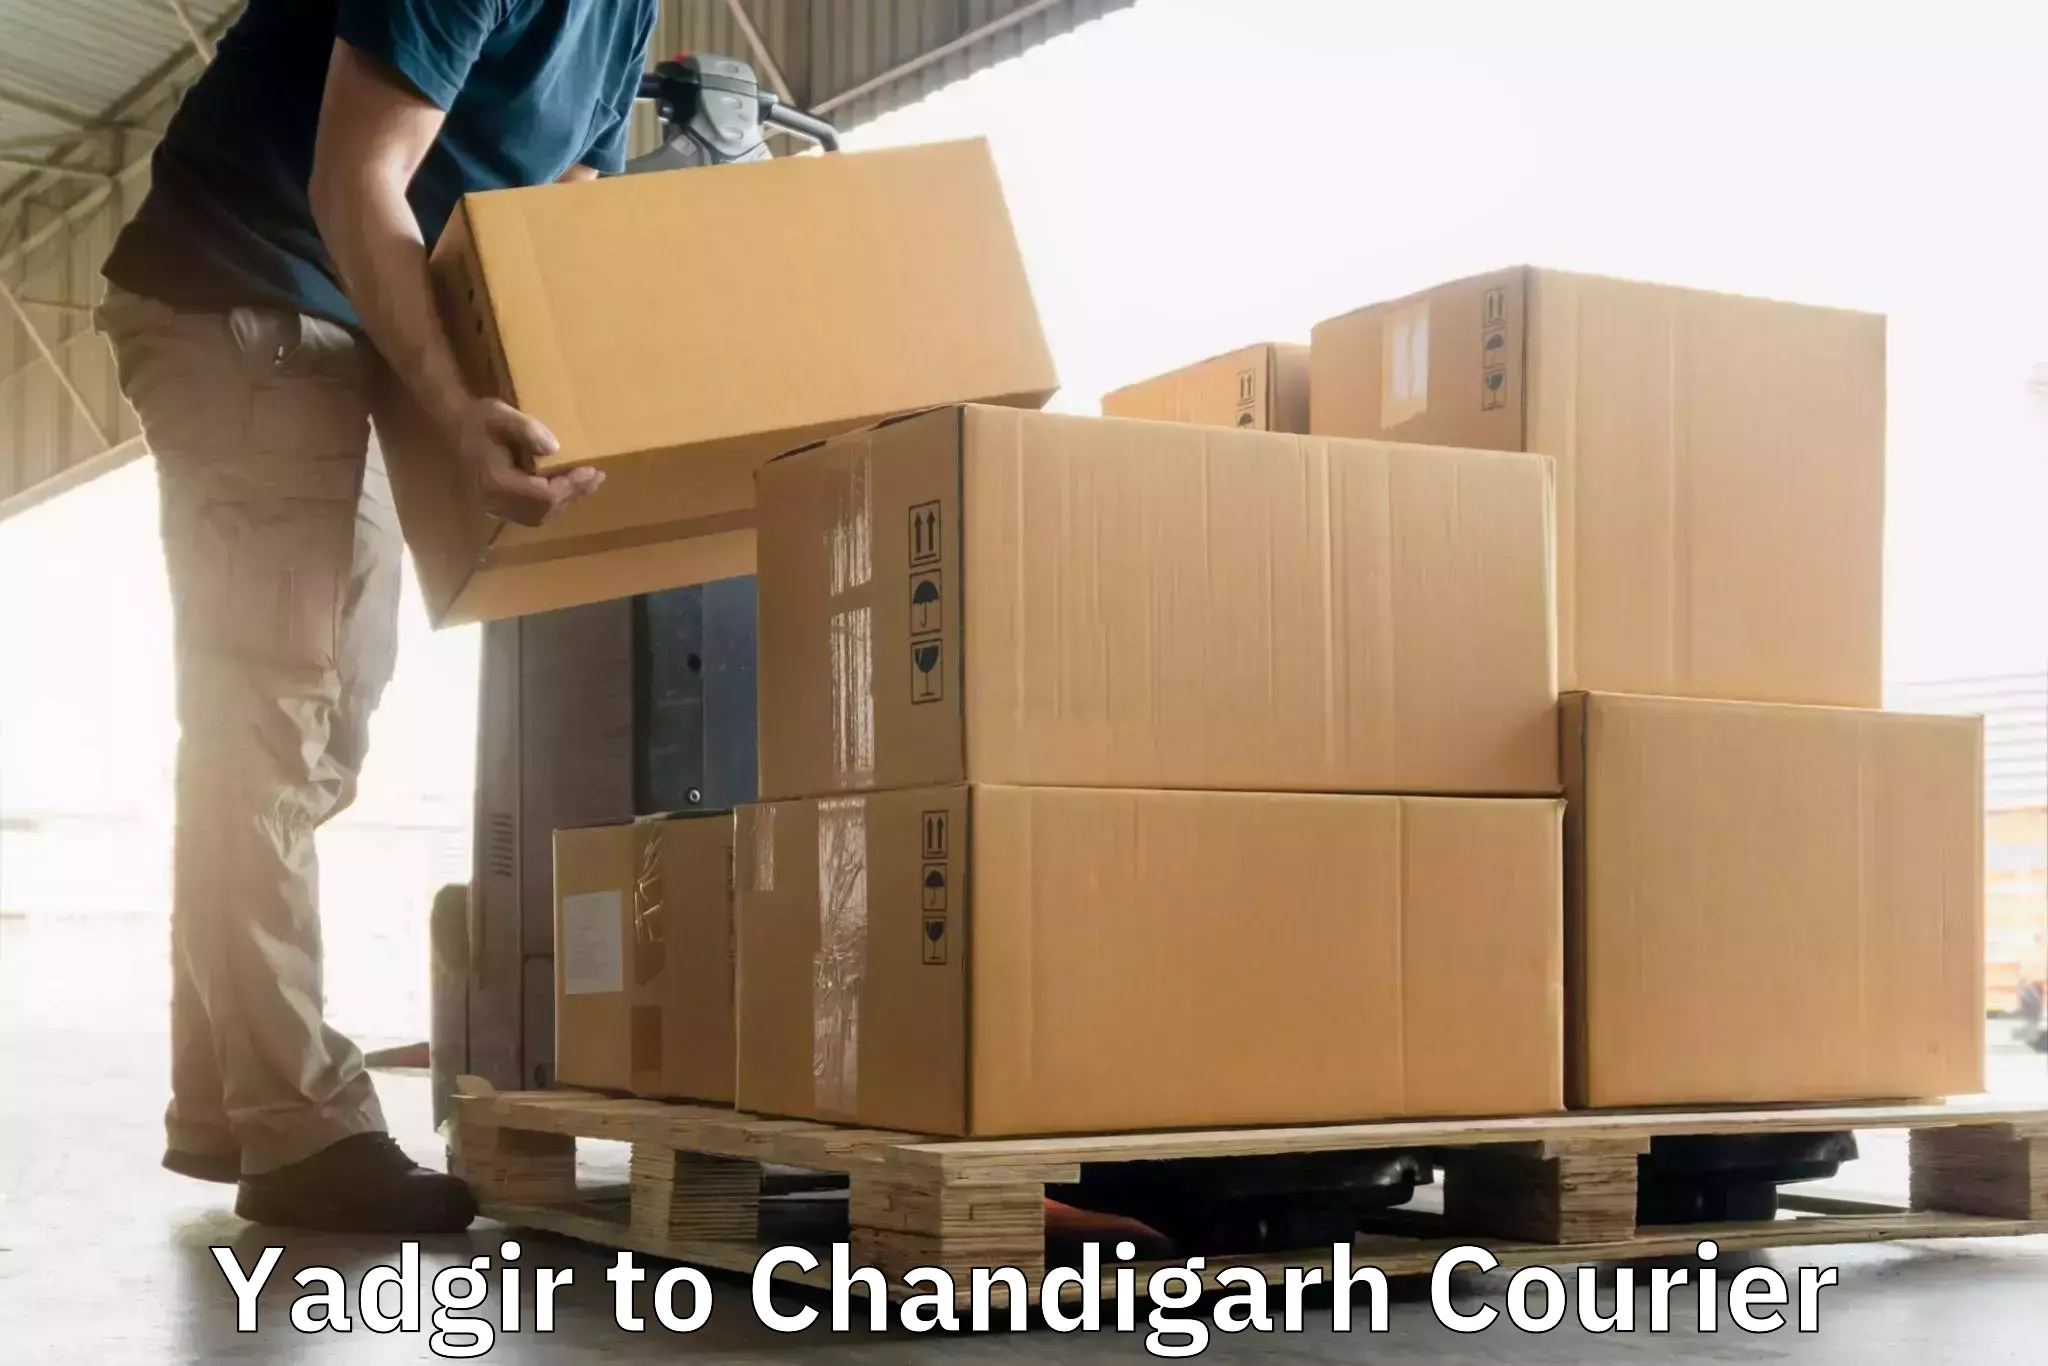 Enhanced tracking features Yadgir to Chandigarh